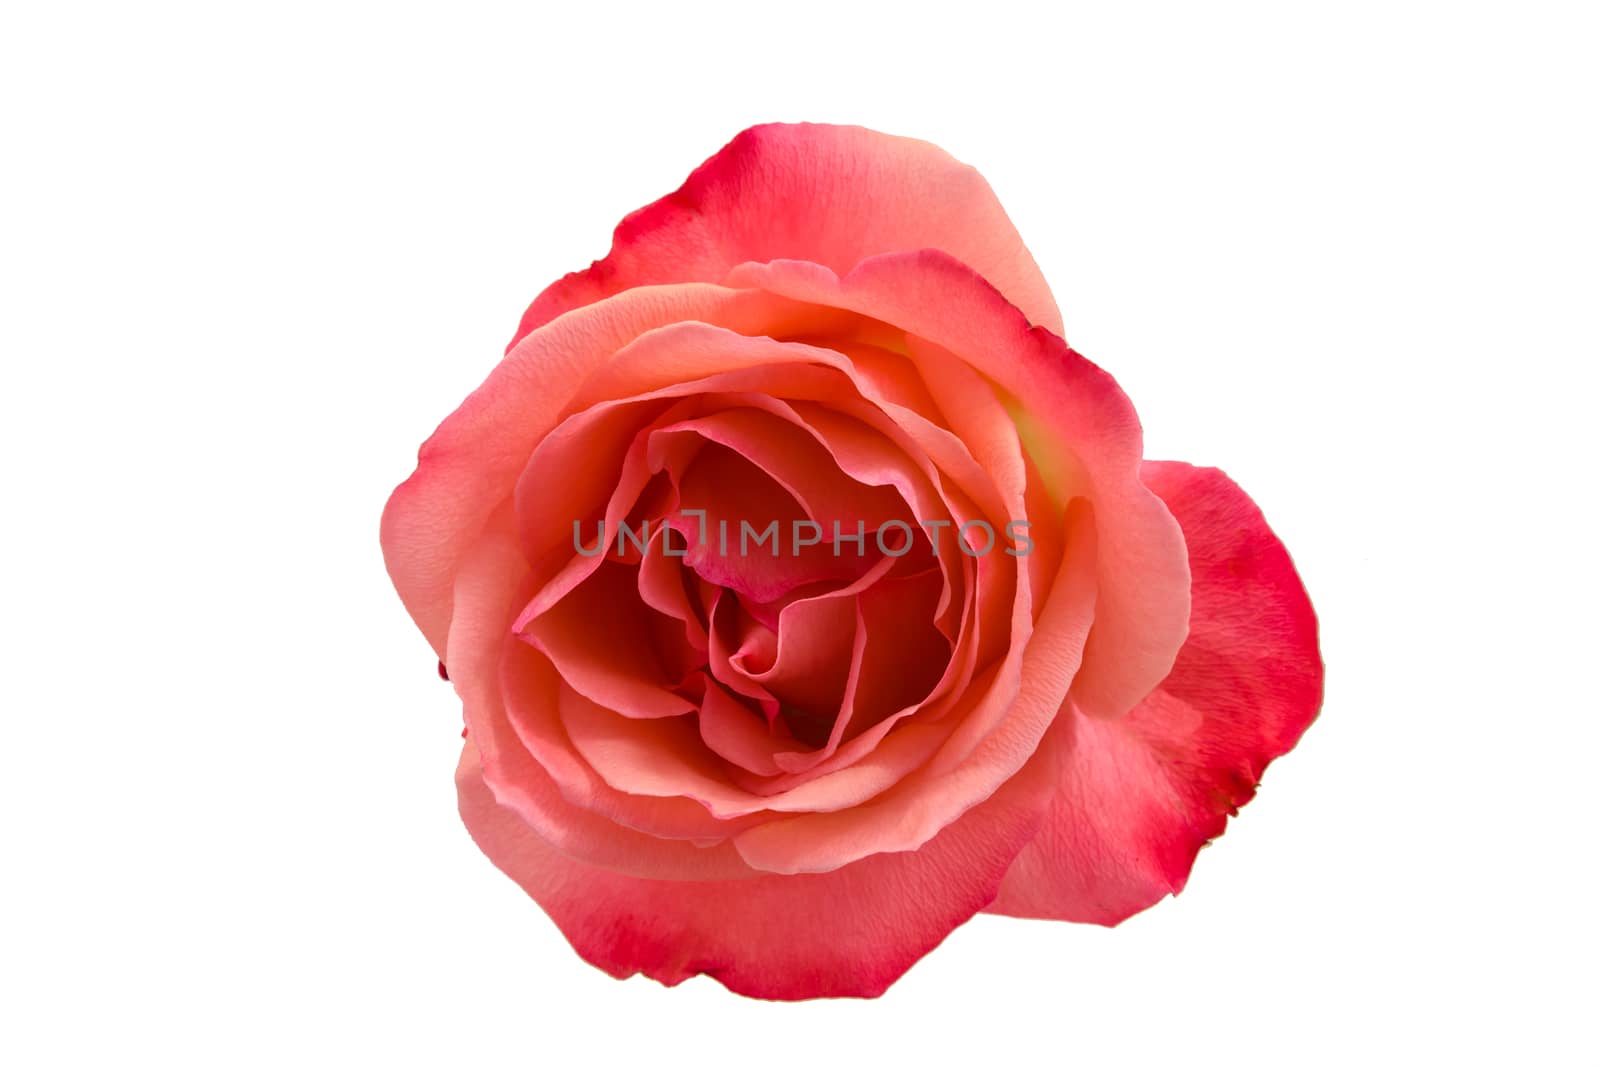 Pink rose isolated on white background by huntz